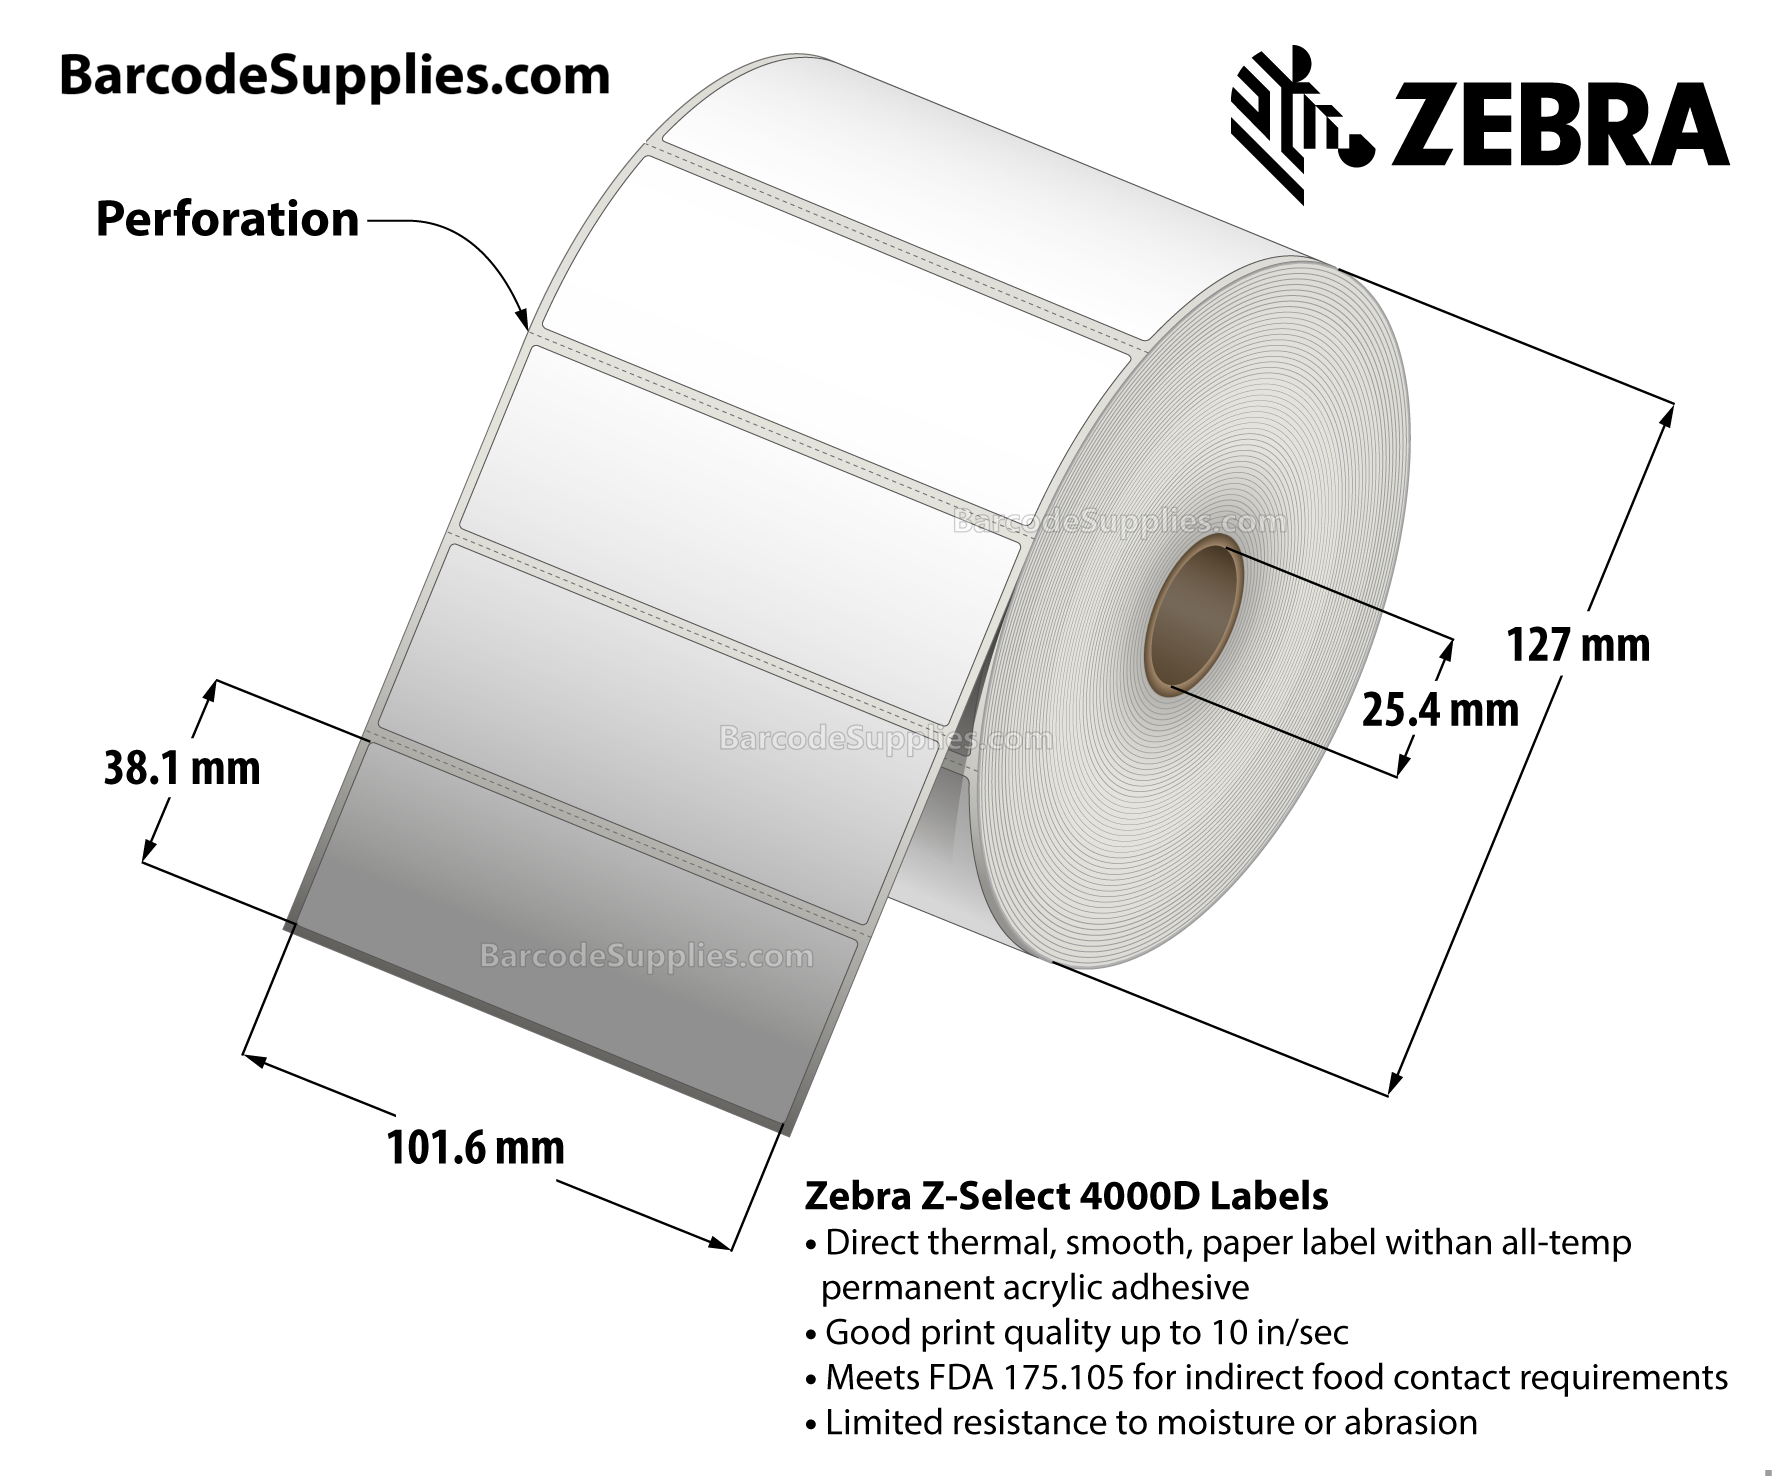 4 x 1.5 Direct Thermal White Z-Select 4000D Labels With All-Temp Adhesive - Perforated - 1620 Labels Per Roll - Carton Of 6 Rolls - 9720 Labels Total - MPN: 10010046